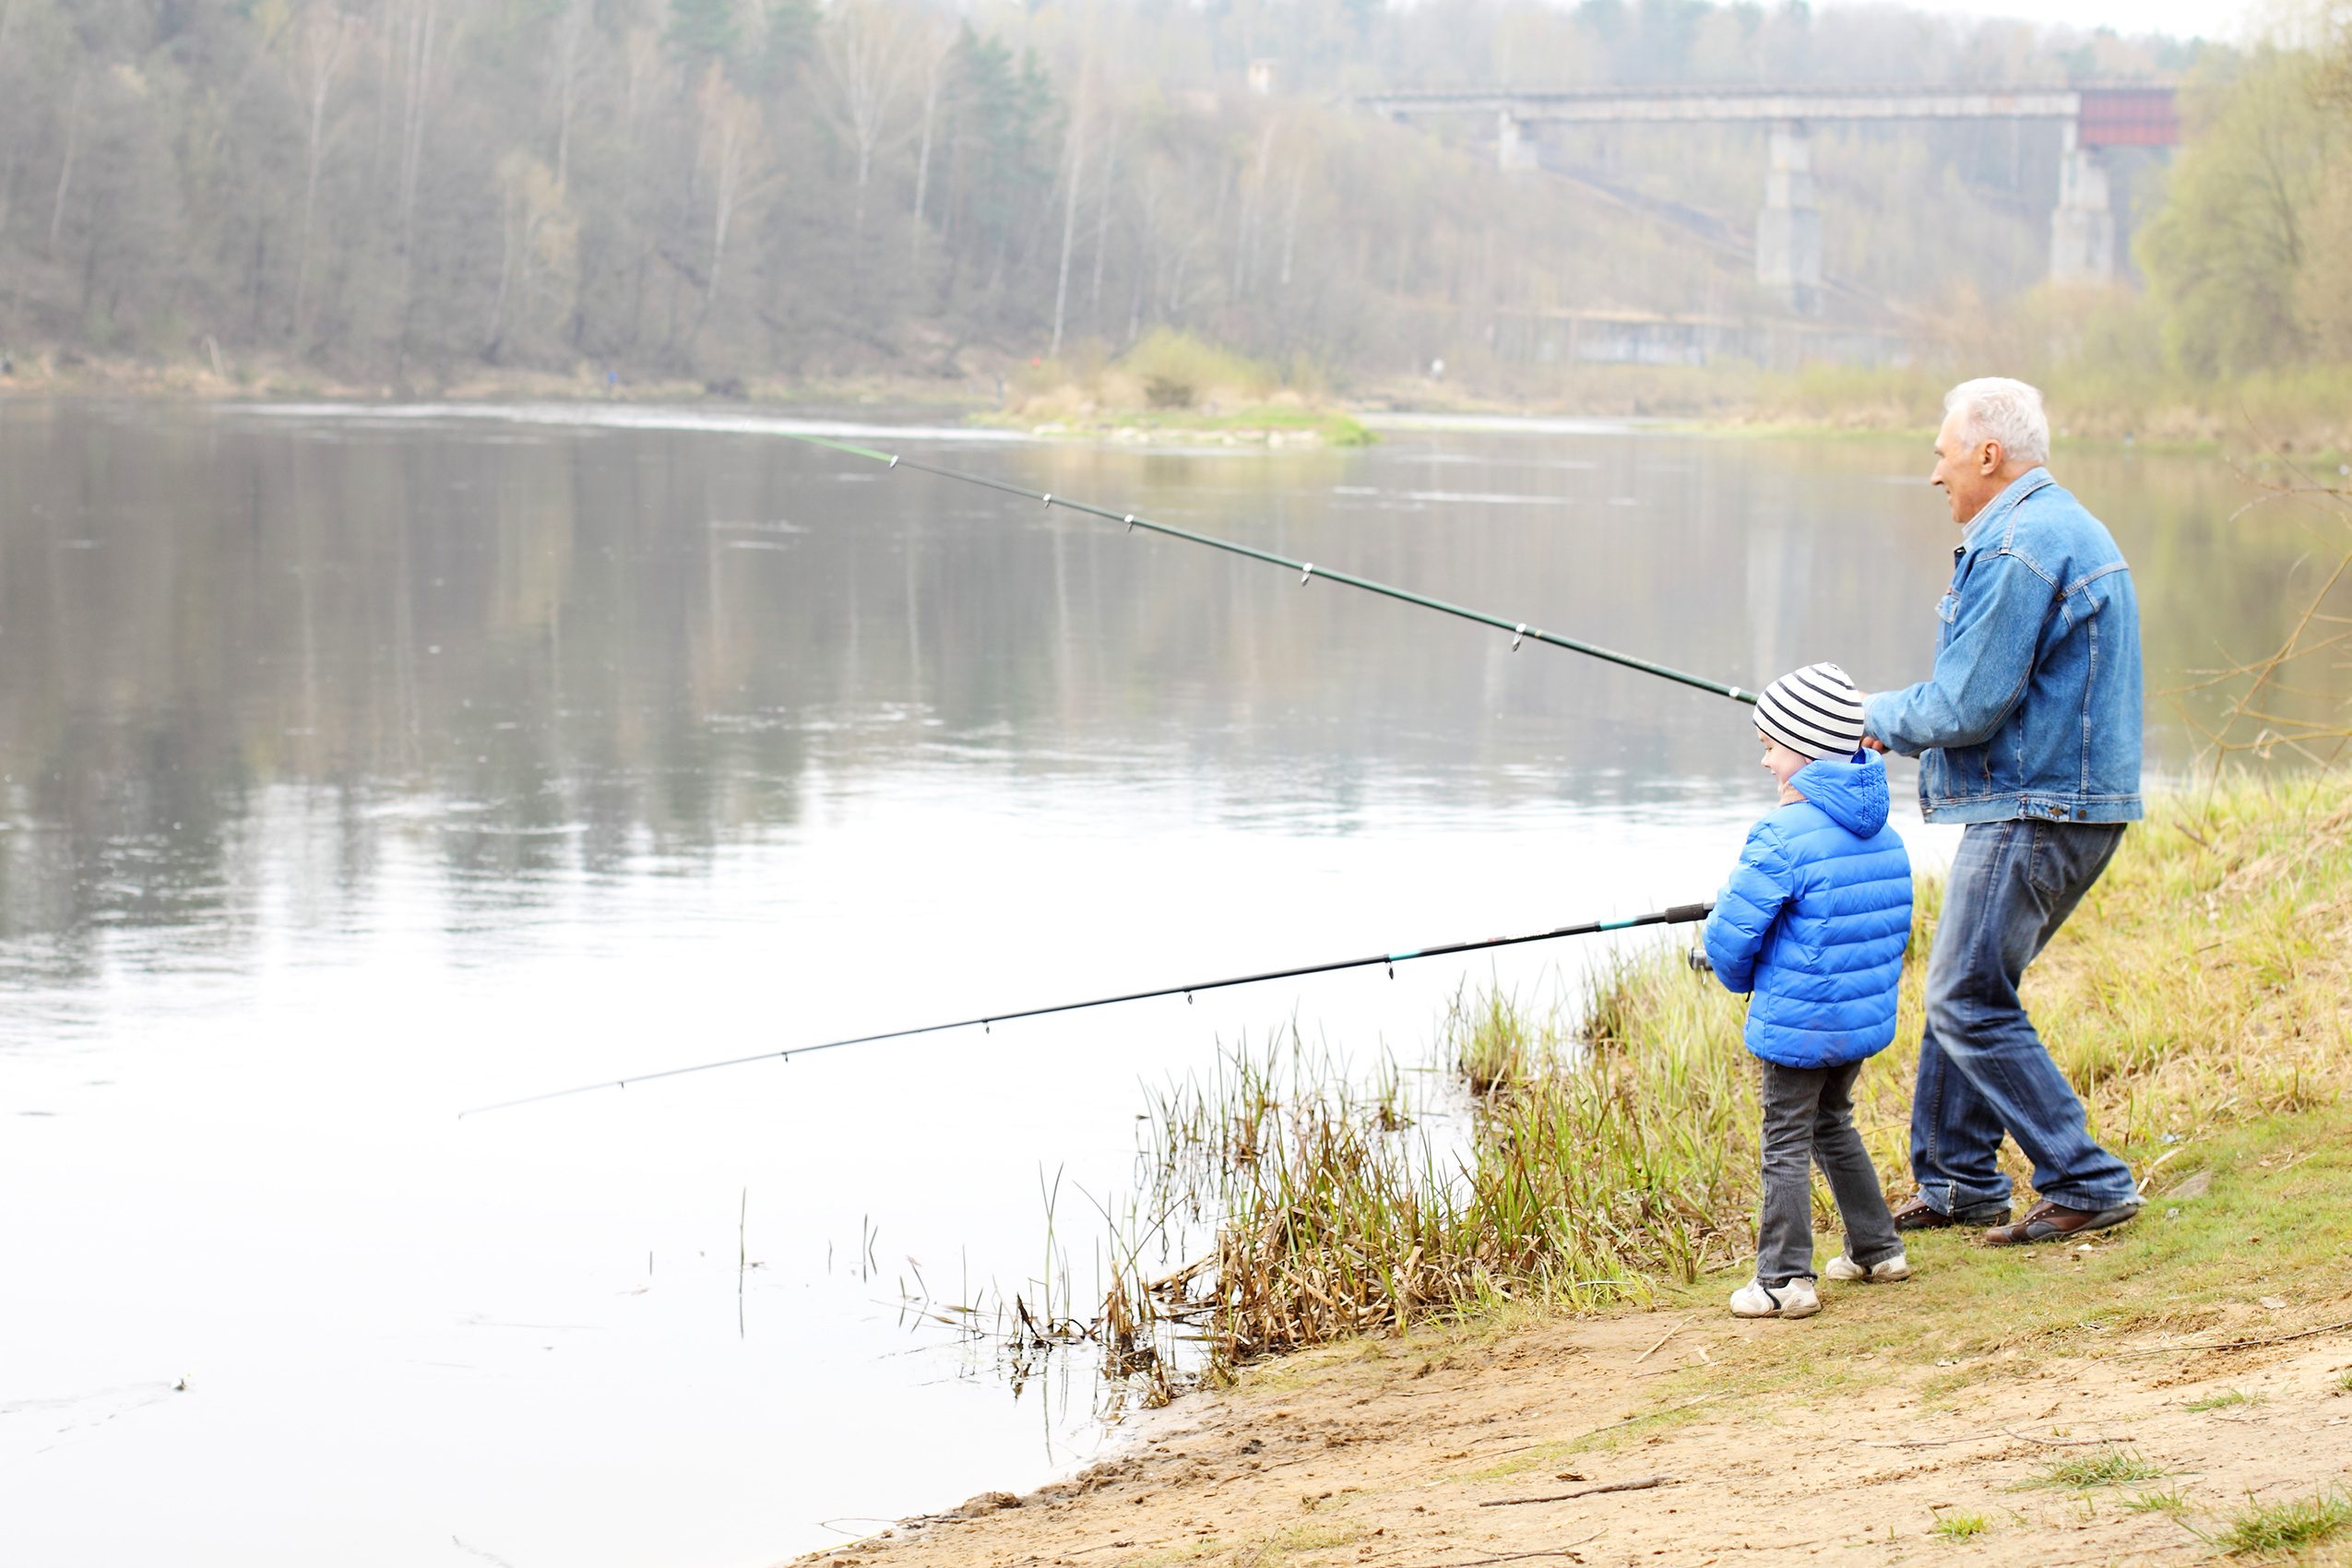 Grandfather and grandson are fishing